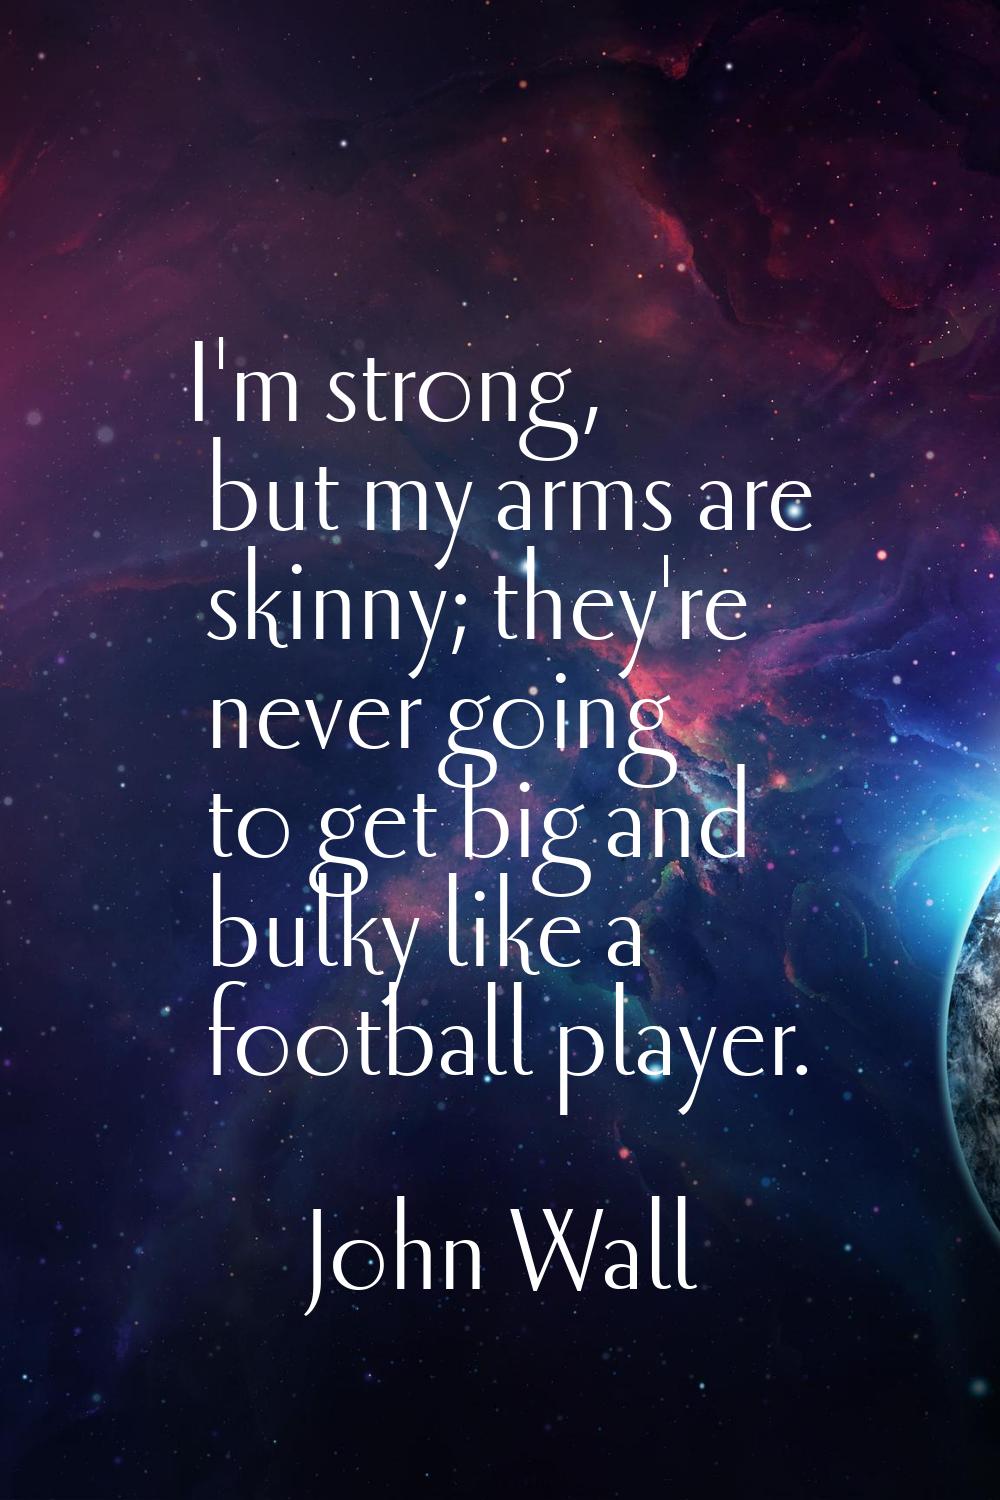 I'm strong, but my arms are skinny; they're never going to get big and bulky like a football player